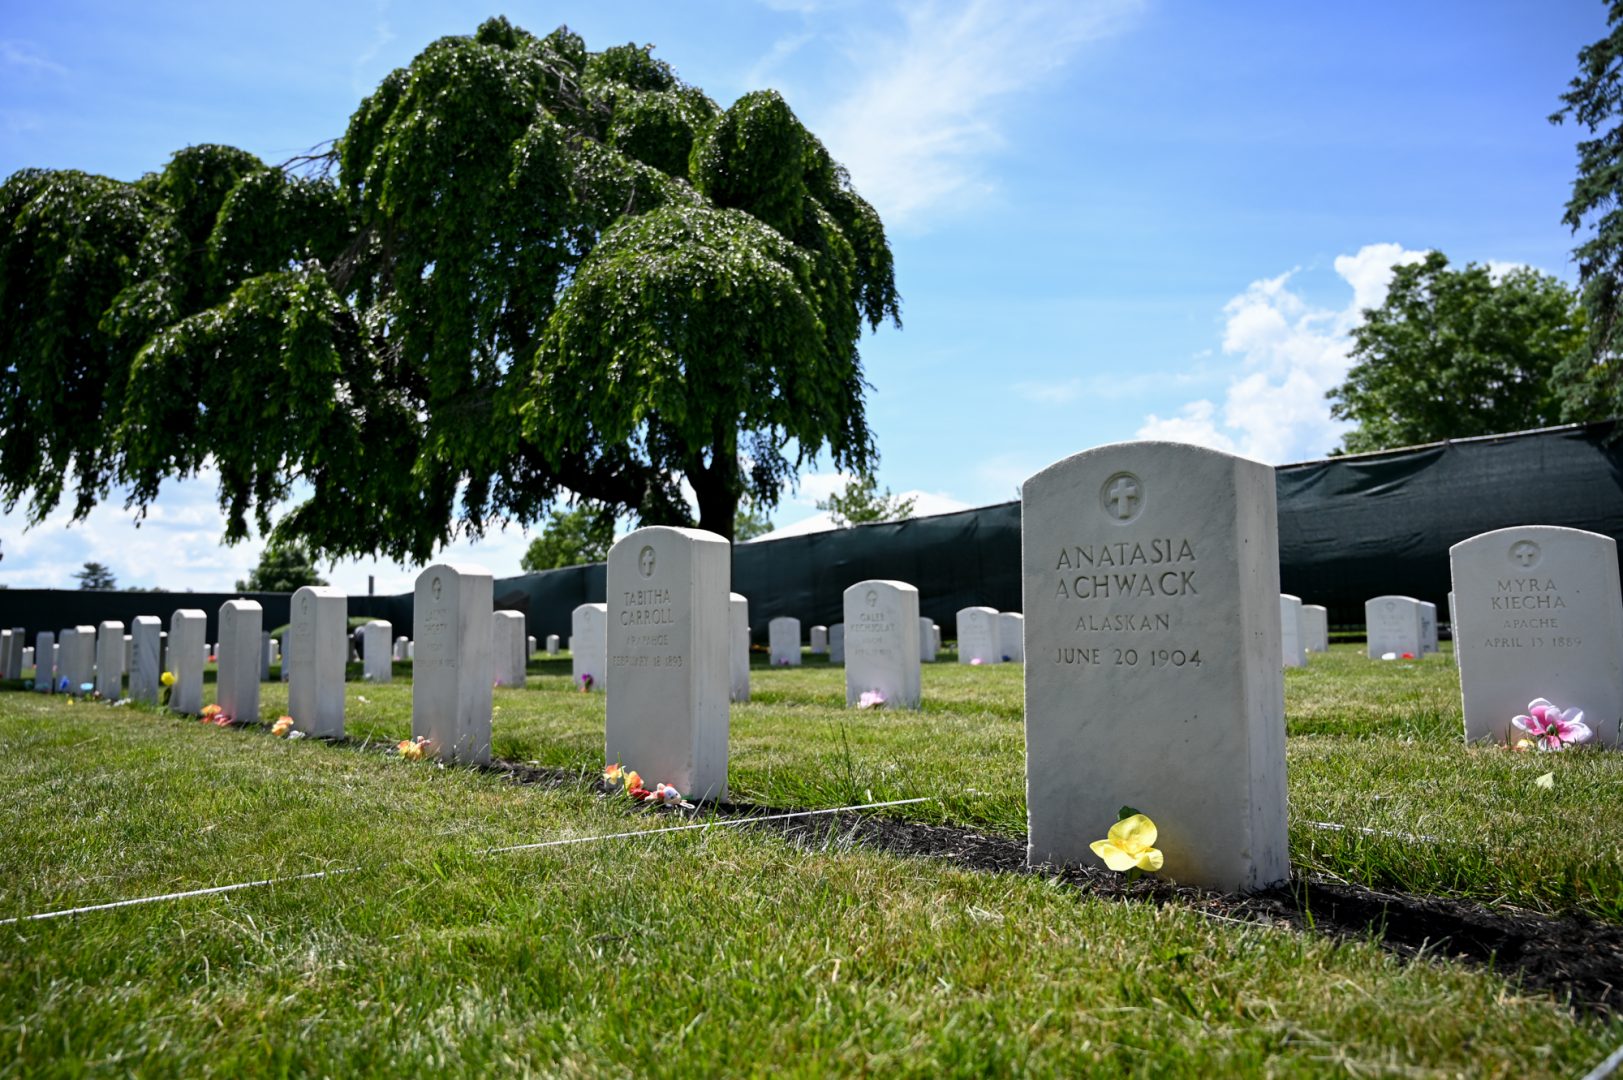 The grave of Anatasia Achwak (Ashowak) as the Office of Army Cemeteries prepare to disinter eight Native American graves at the Carlisle Barracks on June 10, 2022. There children were students at the Carlisle Indian Industrial School operated by the Department of the Interior until 1919.